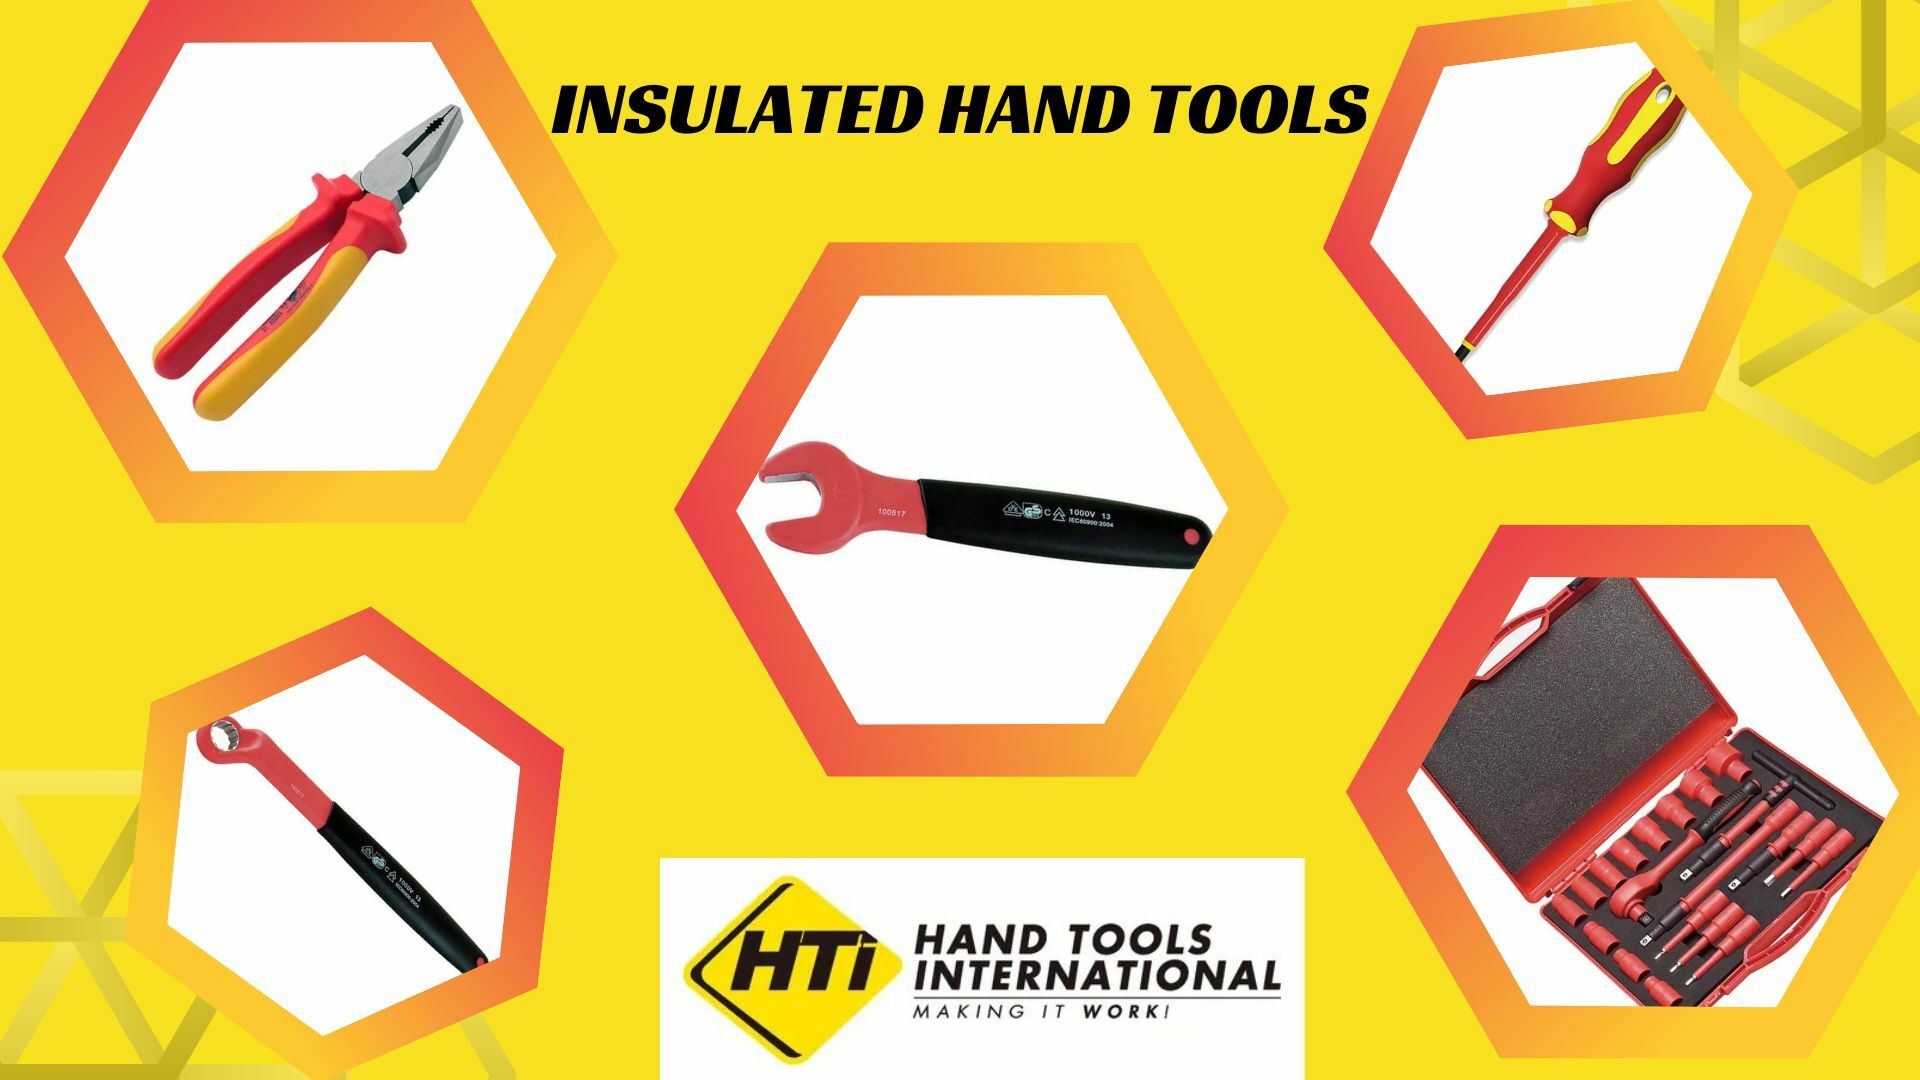 HTI provides insulated hand tools for electric vehicles maintenance